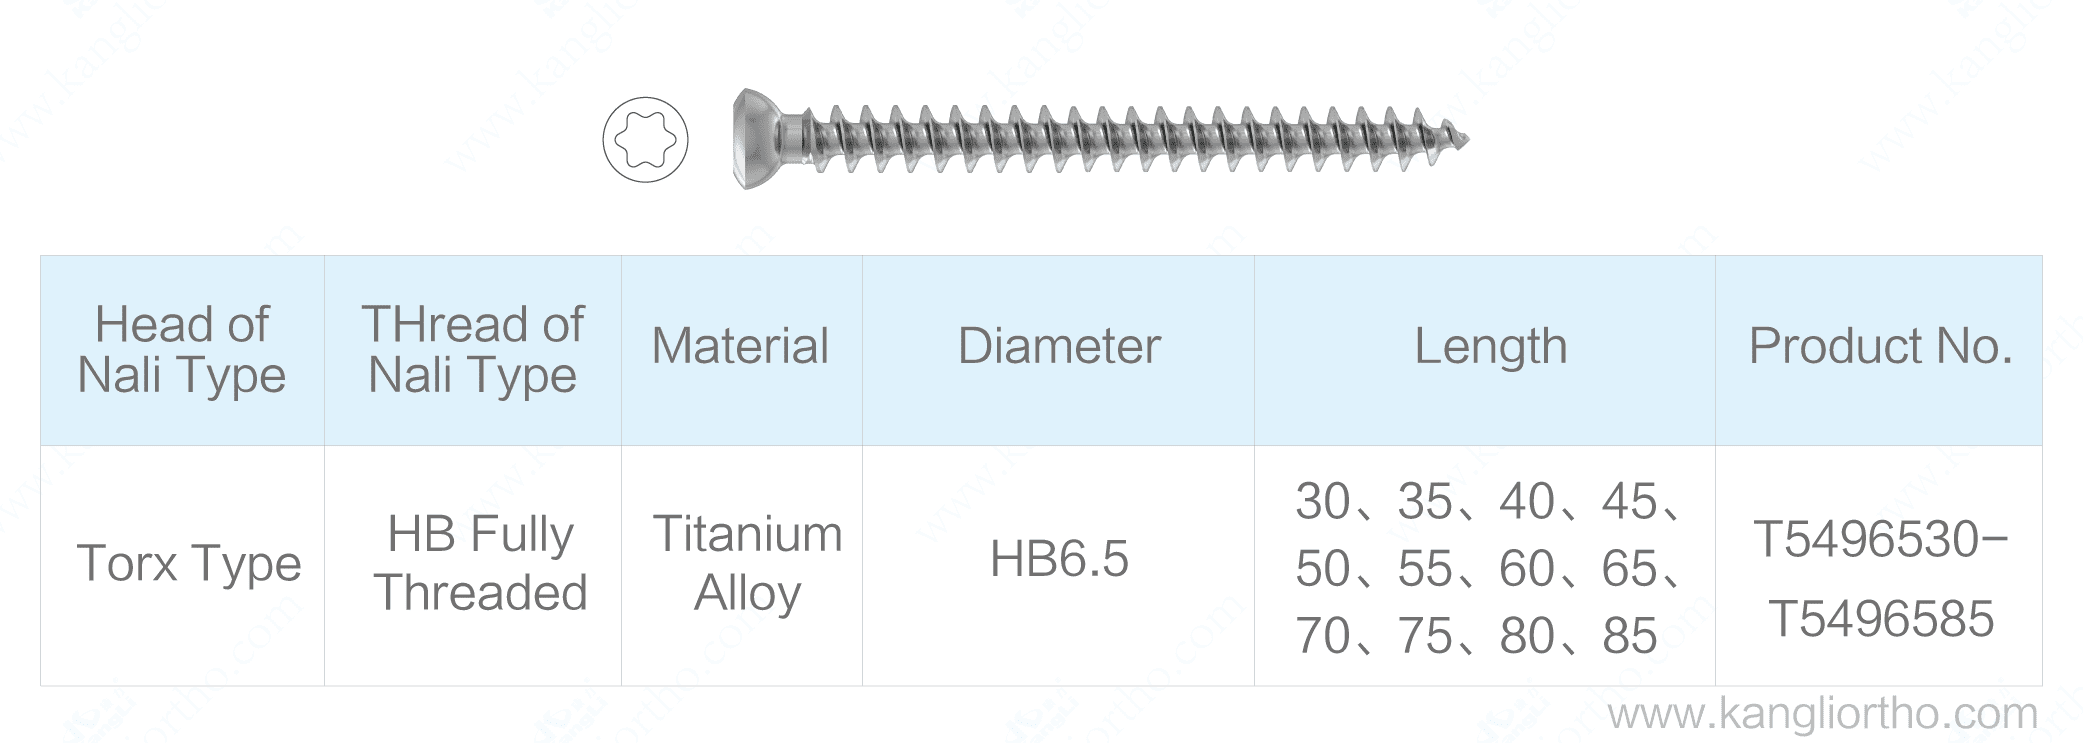 metal-bone-fracture-screw-torx-type-hb6-5-fully-threaded-specifications